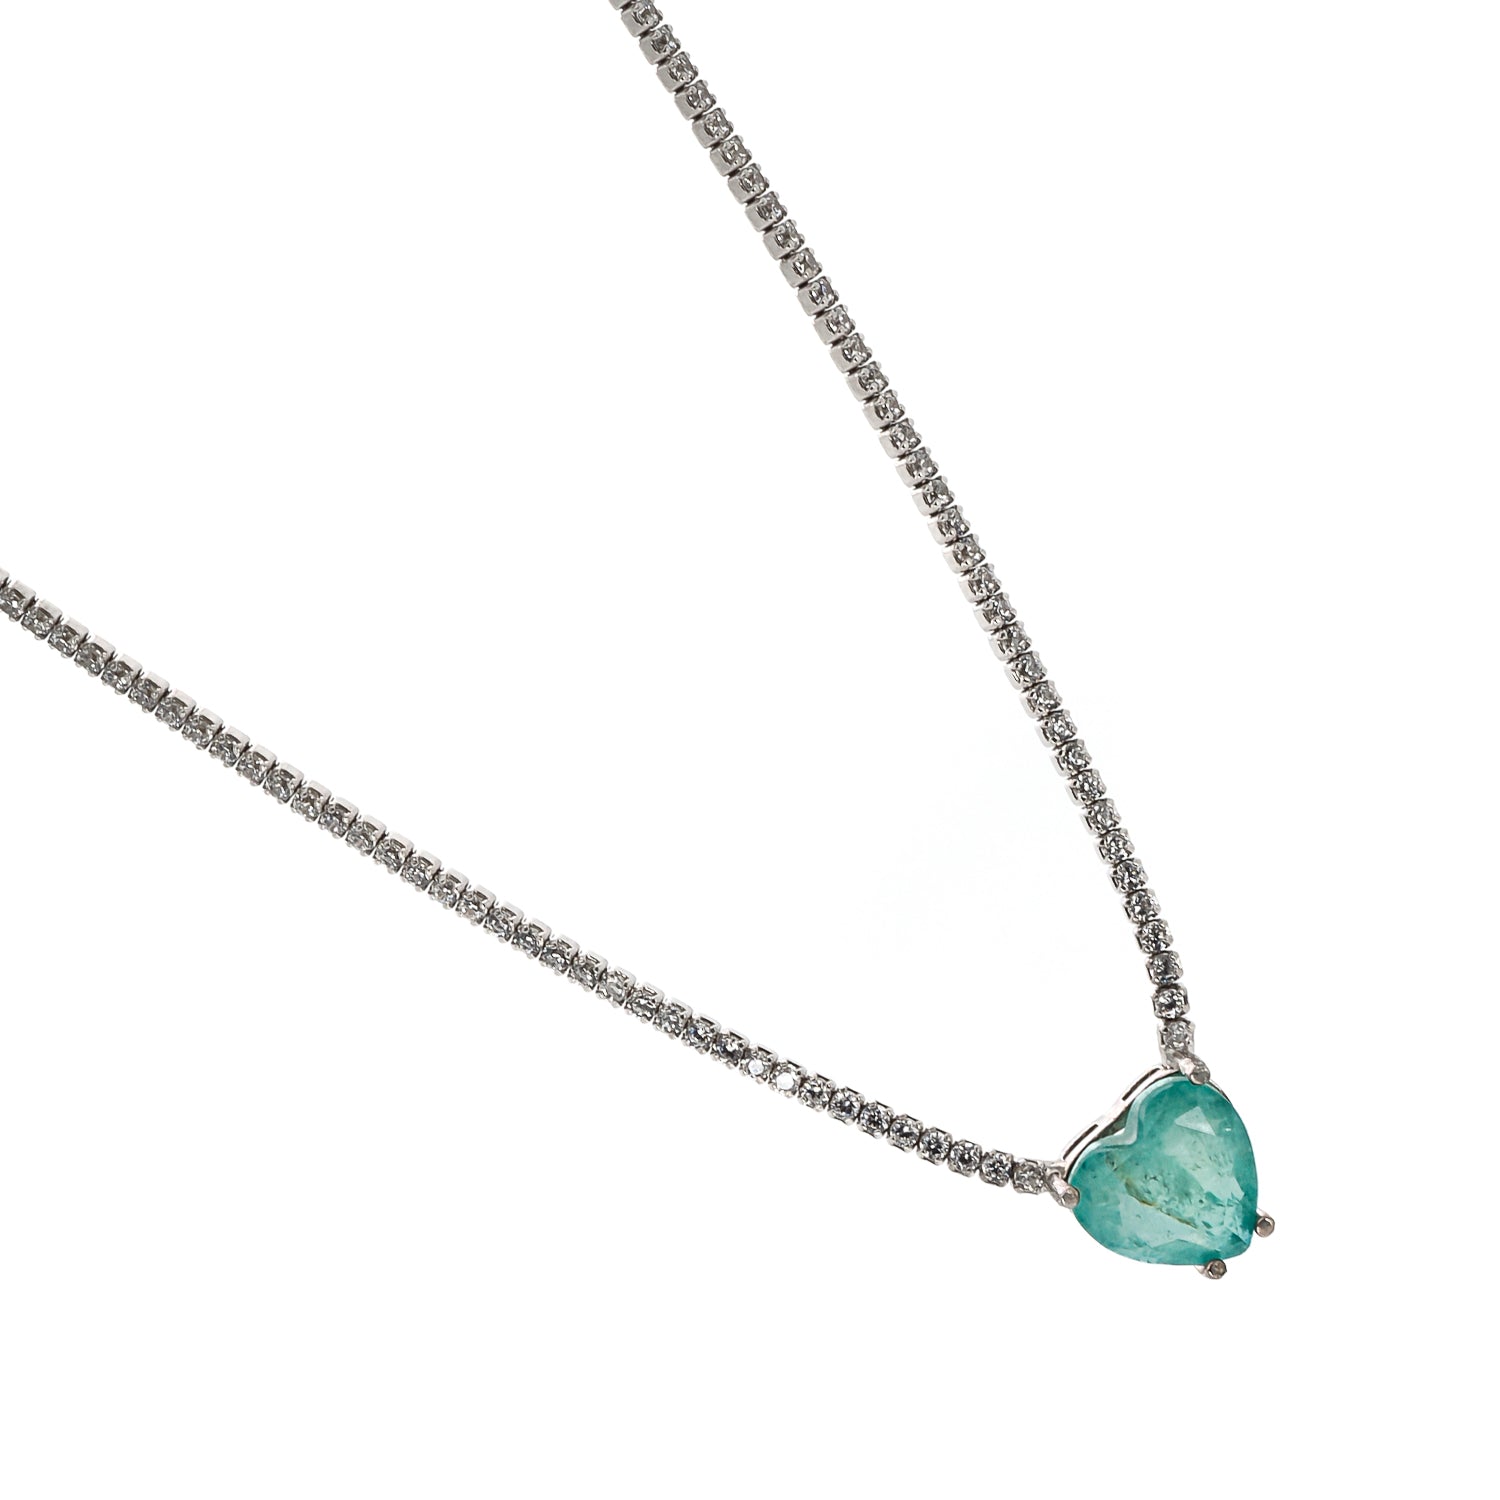 A touch of glamour: Cz Diamond Tennis Chain complementing the pendant